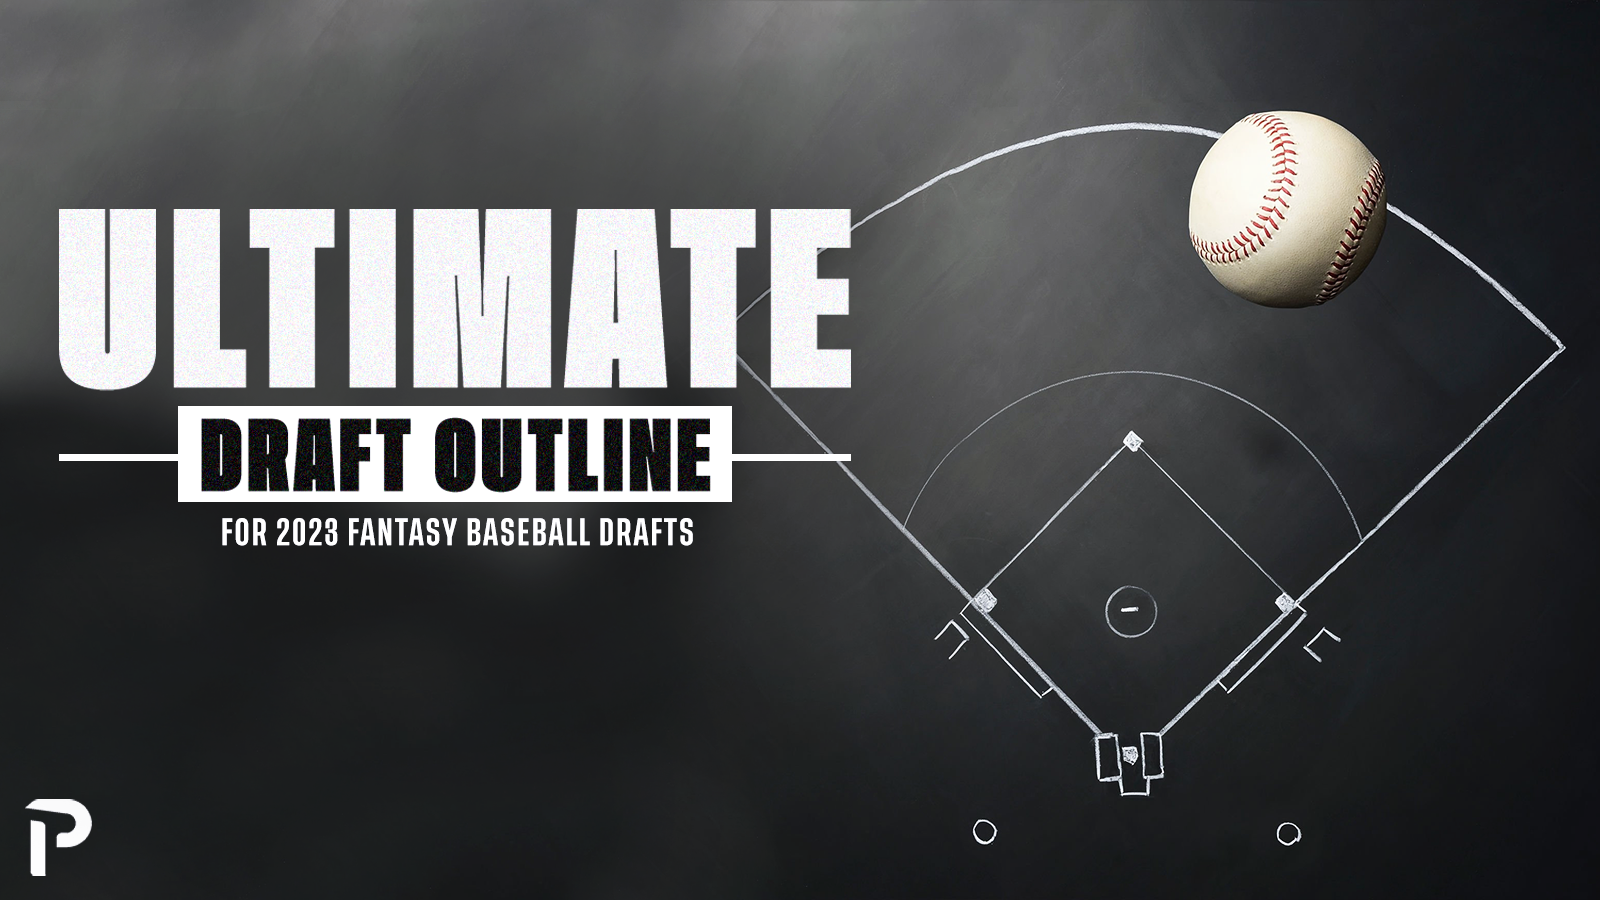 Outfield Draft Values for Fantasy Baseball (2023)